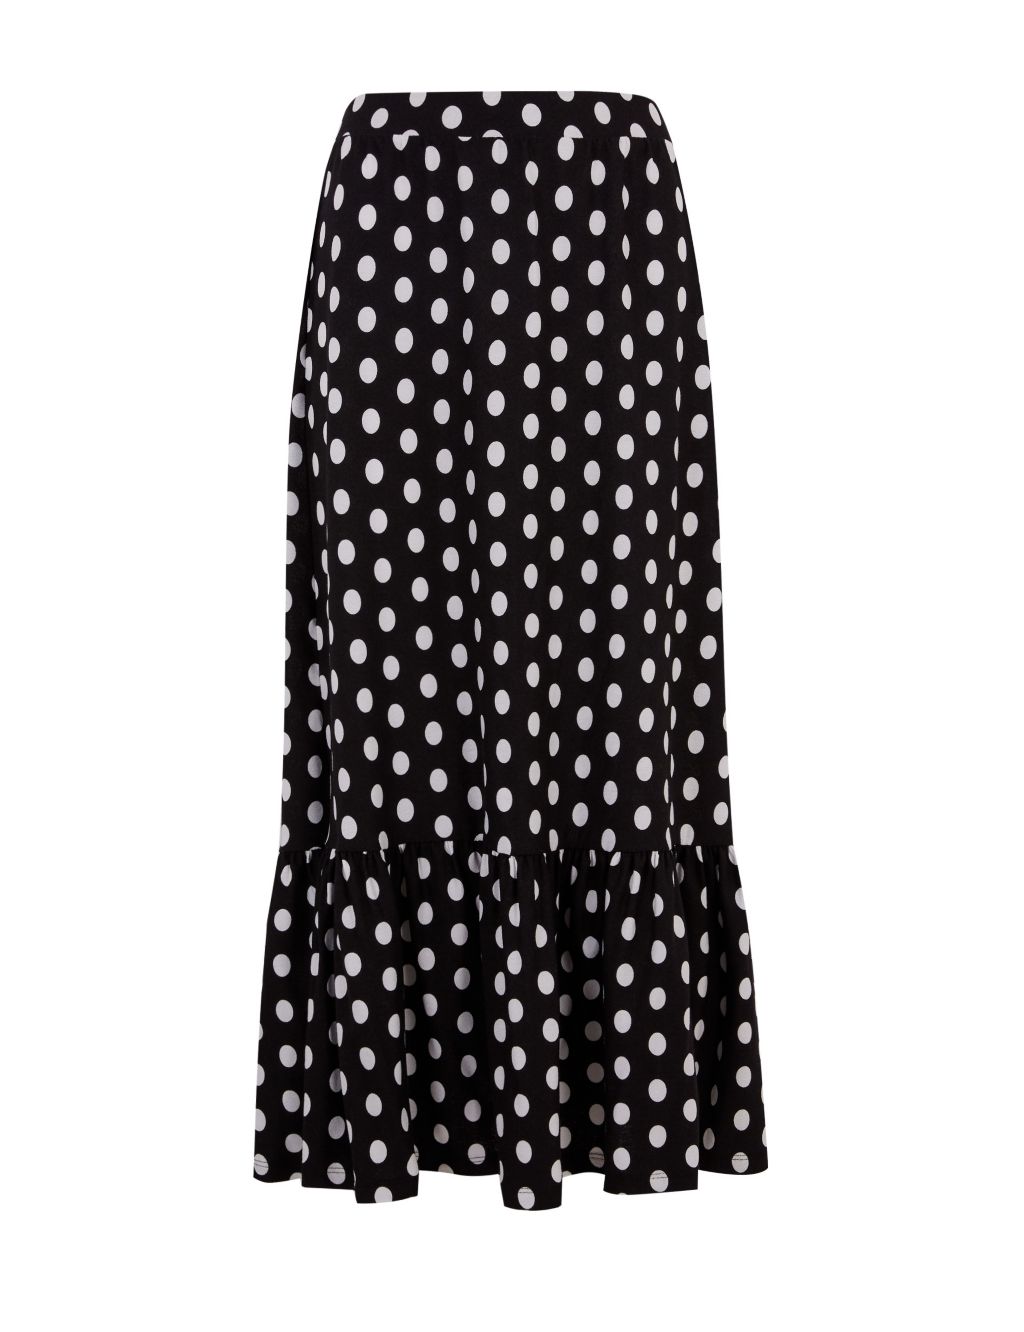 Jersey Polka Dot Midi Tiered Skirt | M&S Collection | M&S